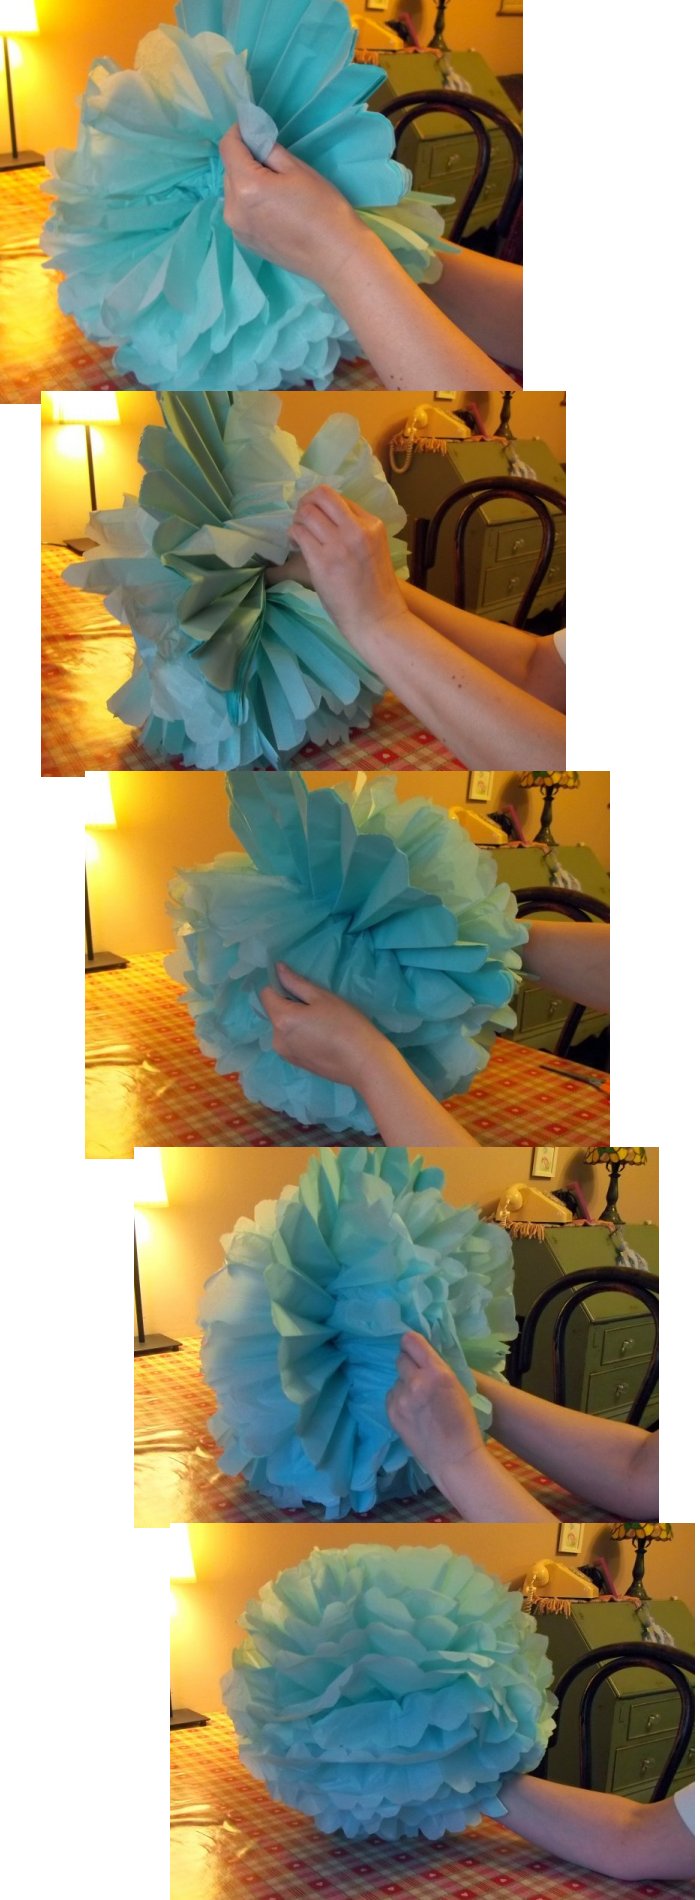 Things to make and do - Tissue paper pom-poms